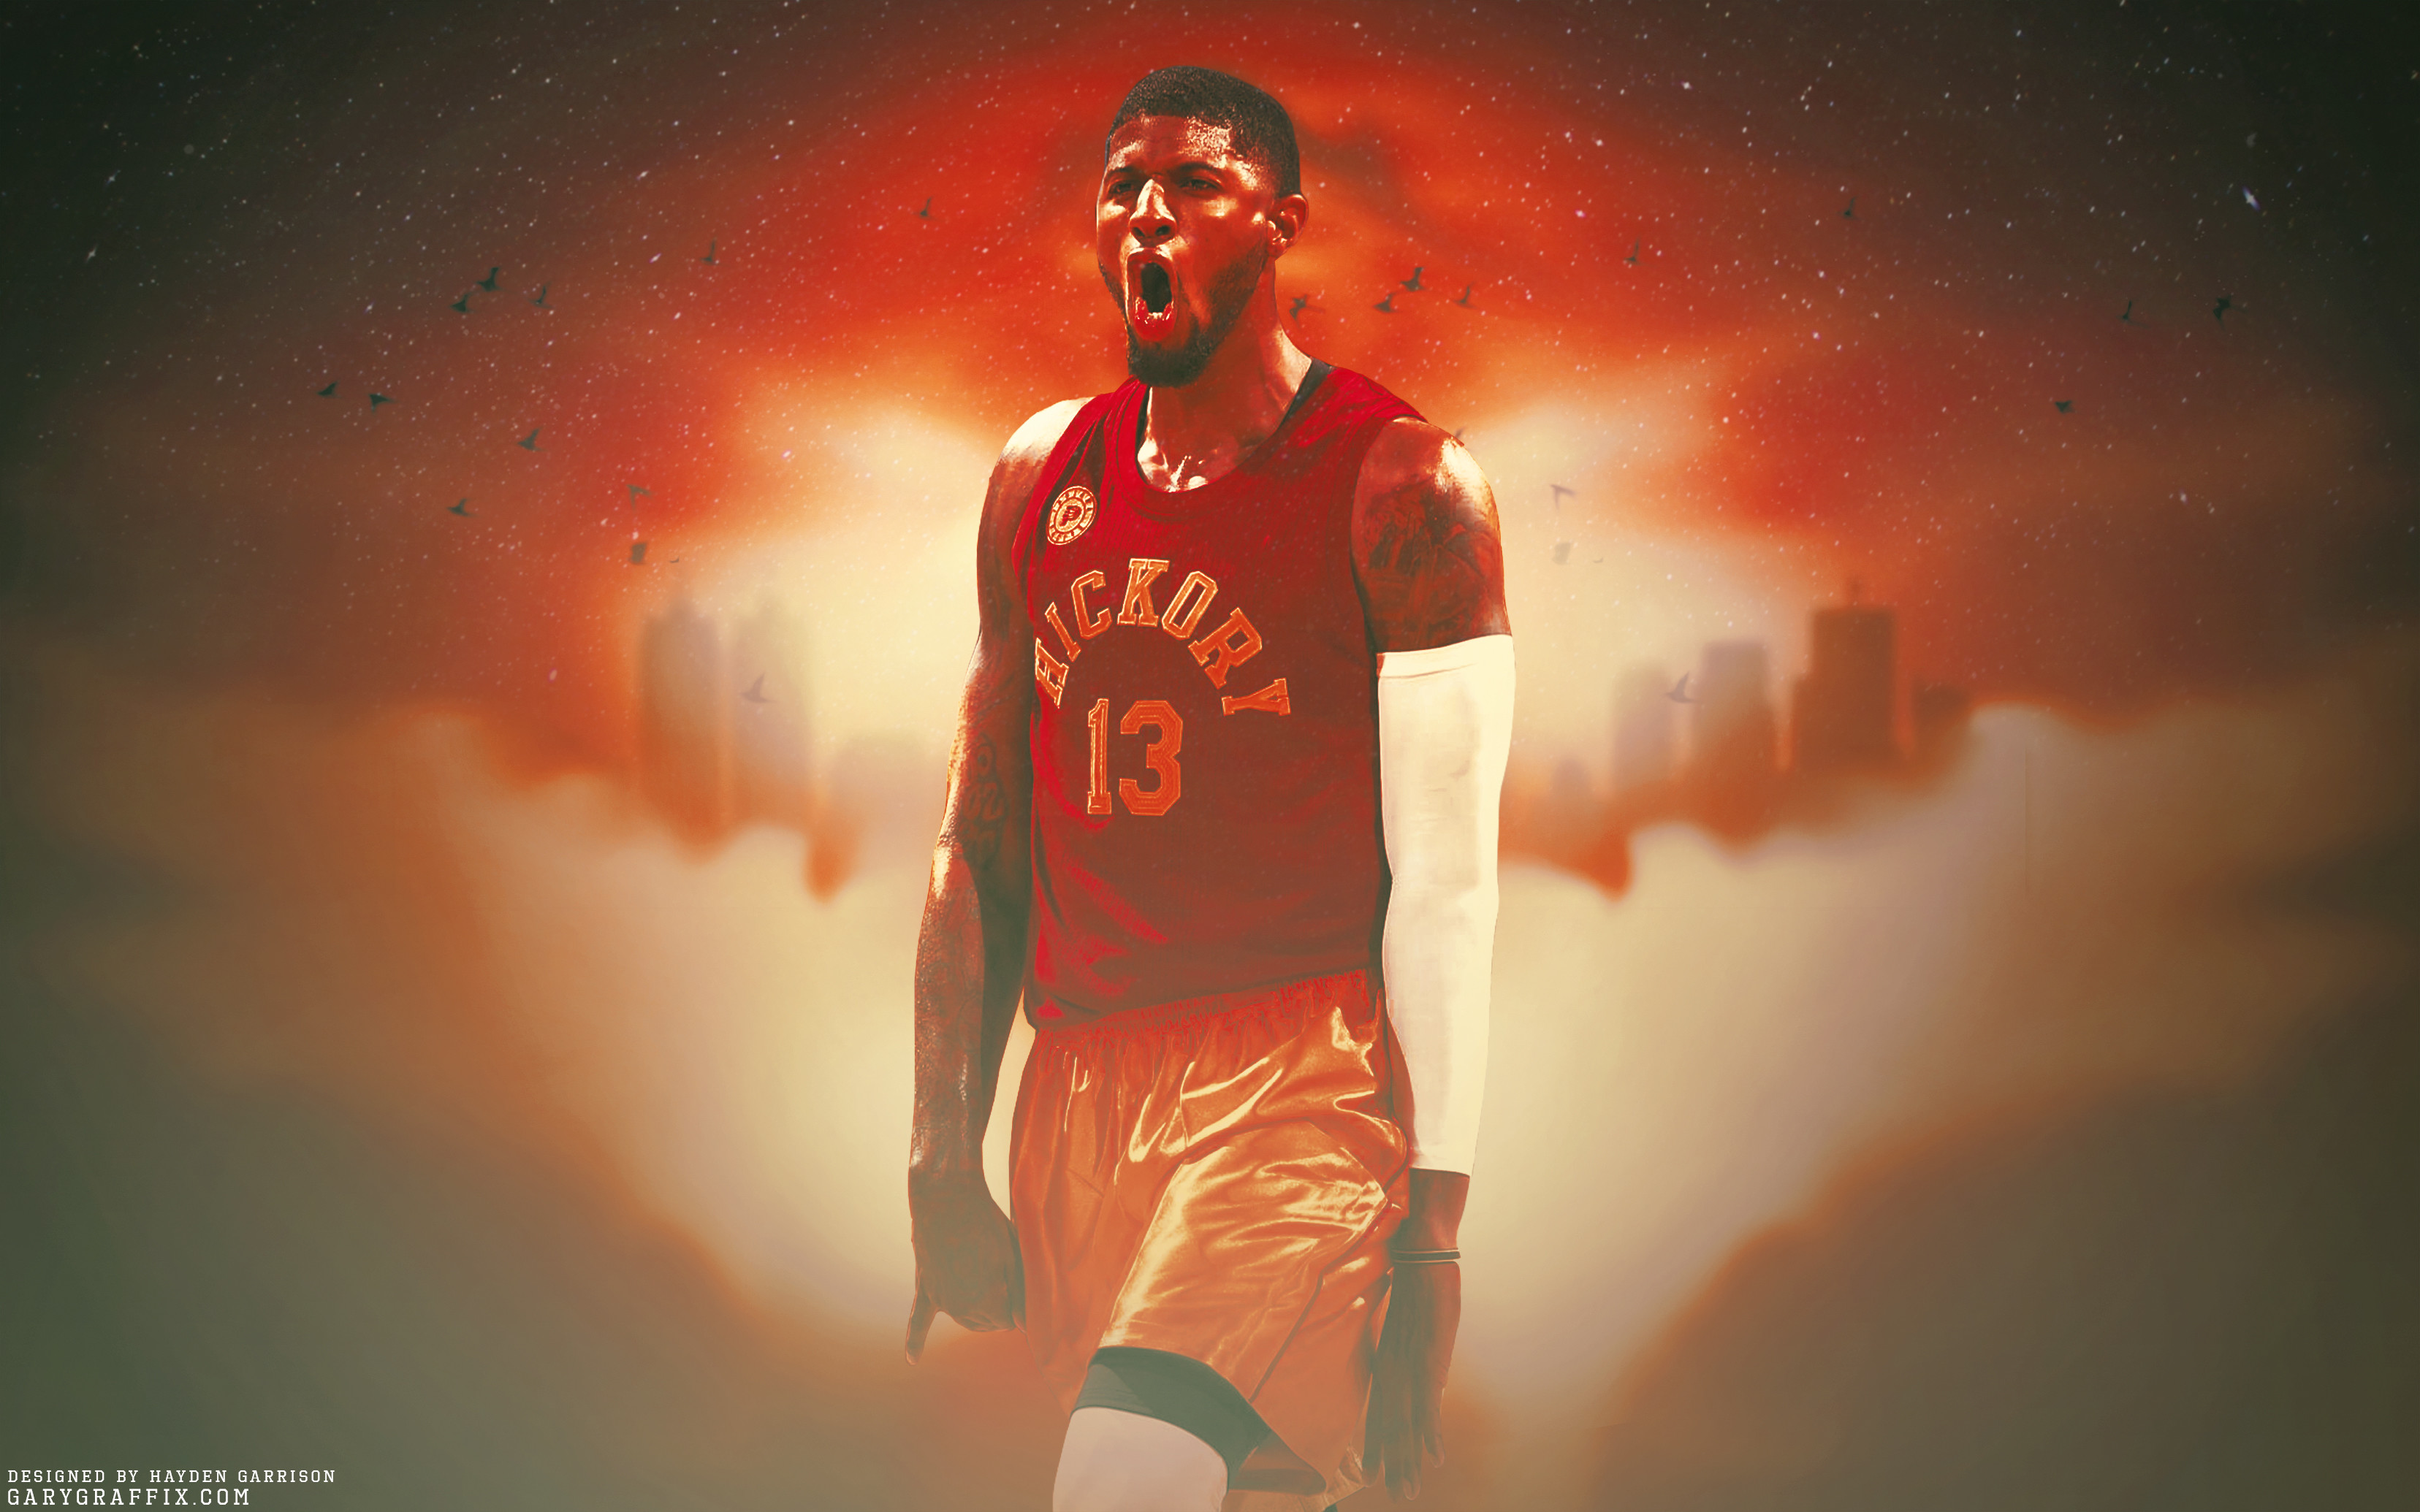 3312x2070 Paul George Inidana Pacers "My City" Wallpaper